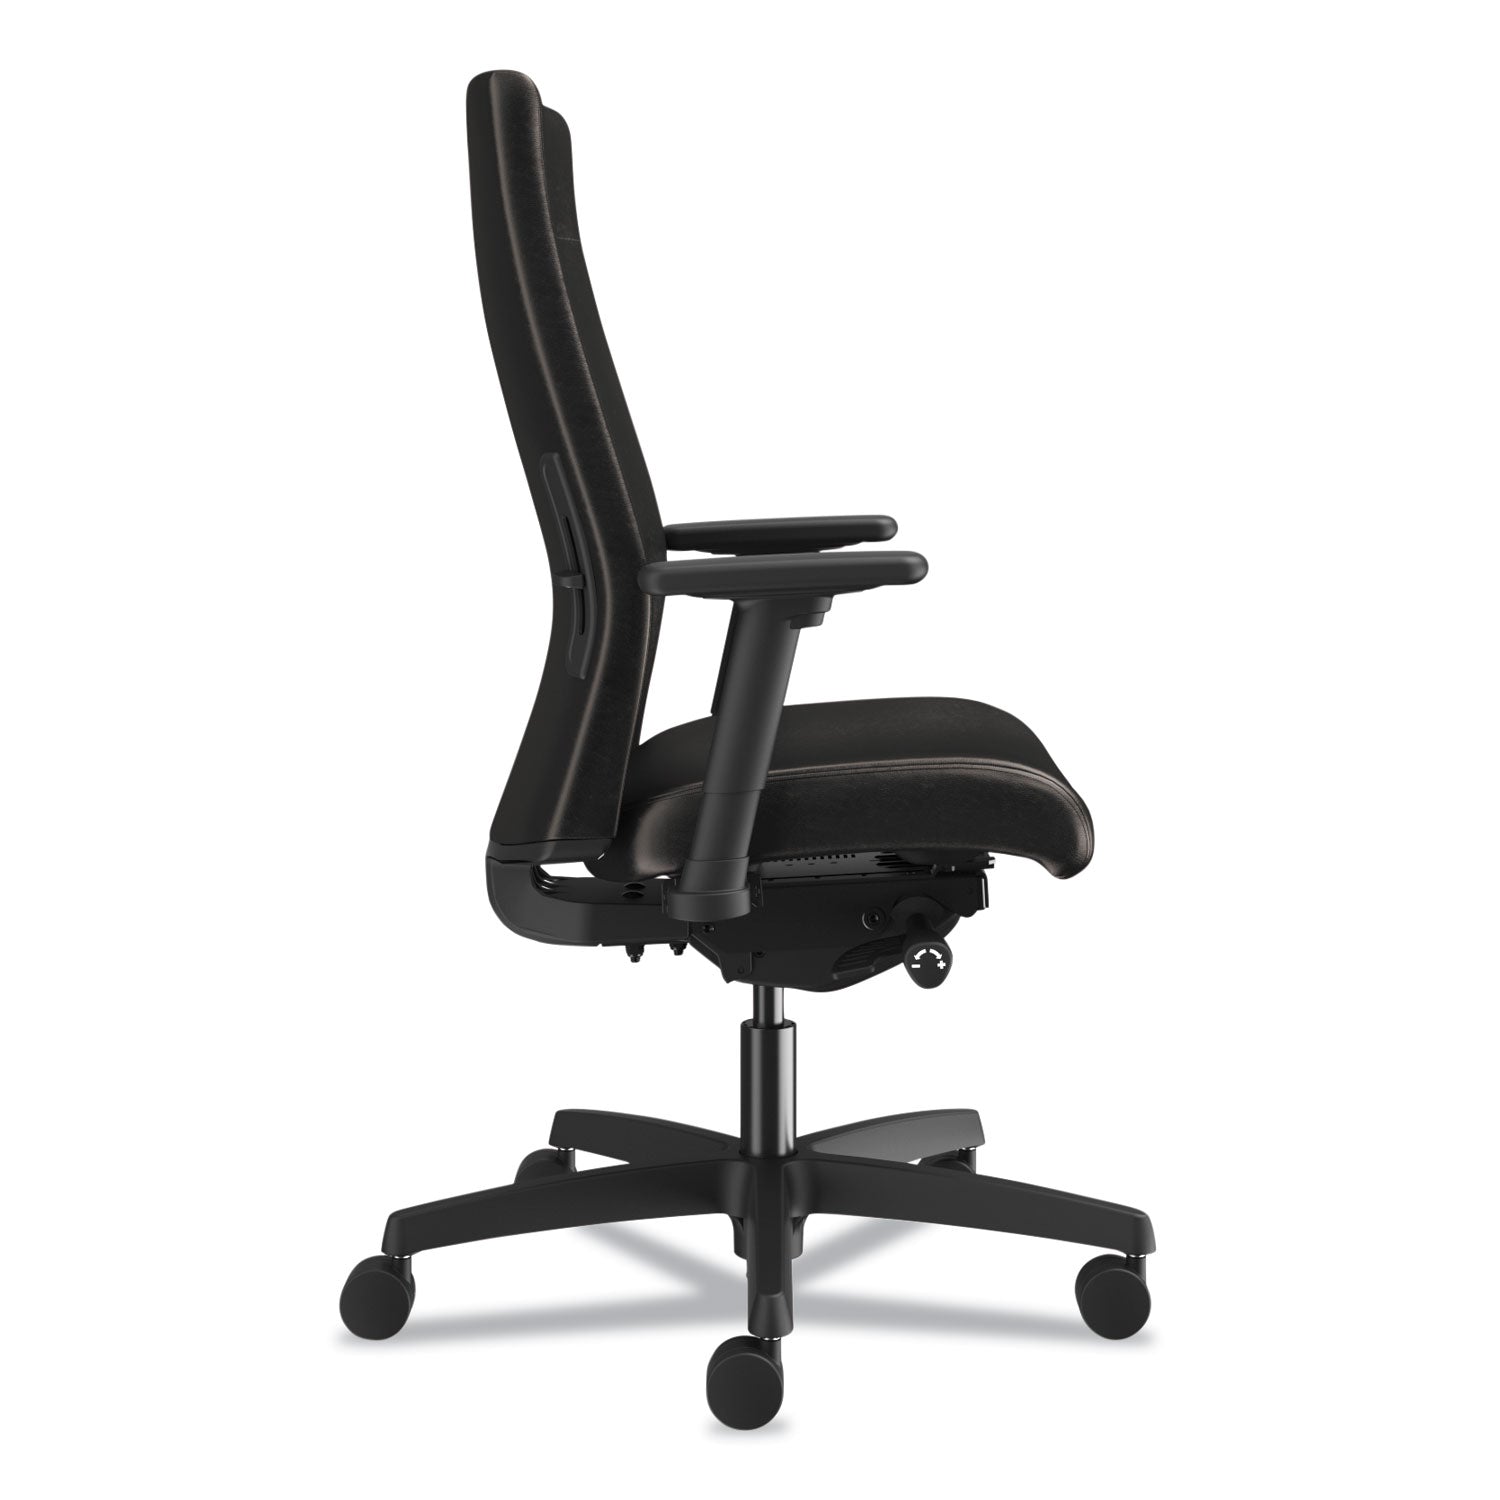 ignition-20-upholstered-mid-back-task-chair-with-lumbar-supports-300-lb-17-to-22-seat-black-vinyl-seat-back-black-base_honi2ul2au10tk - 4